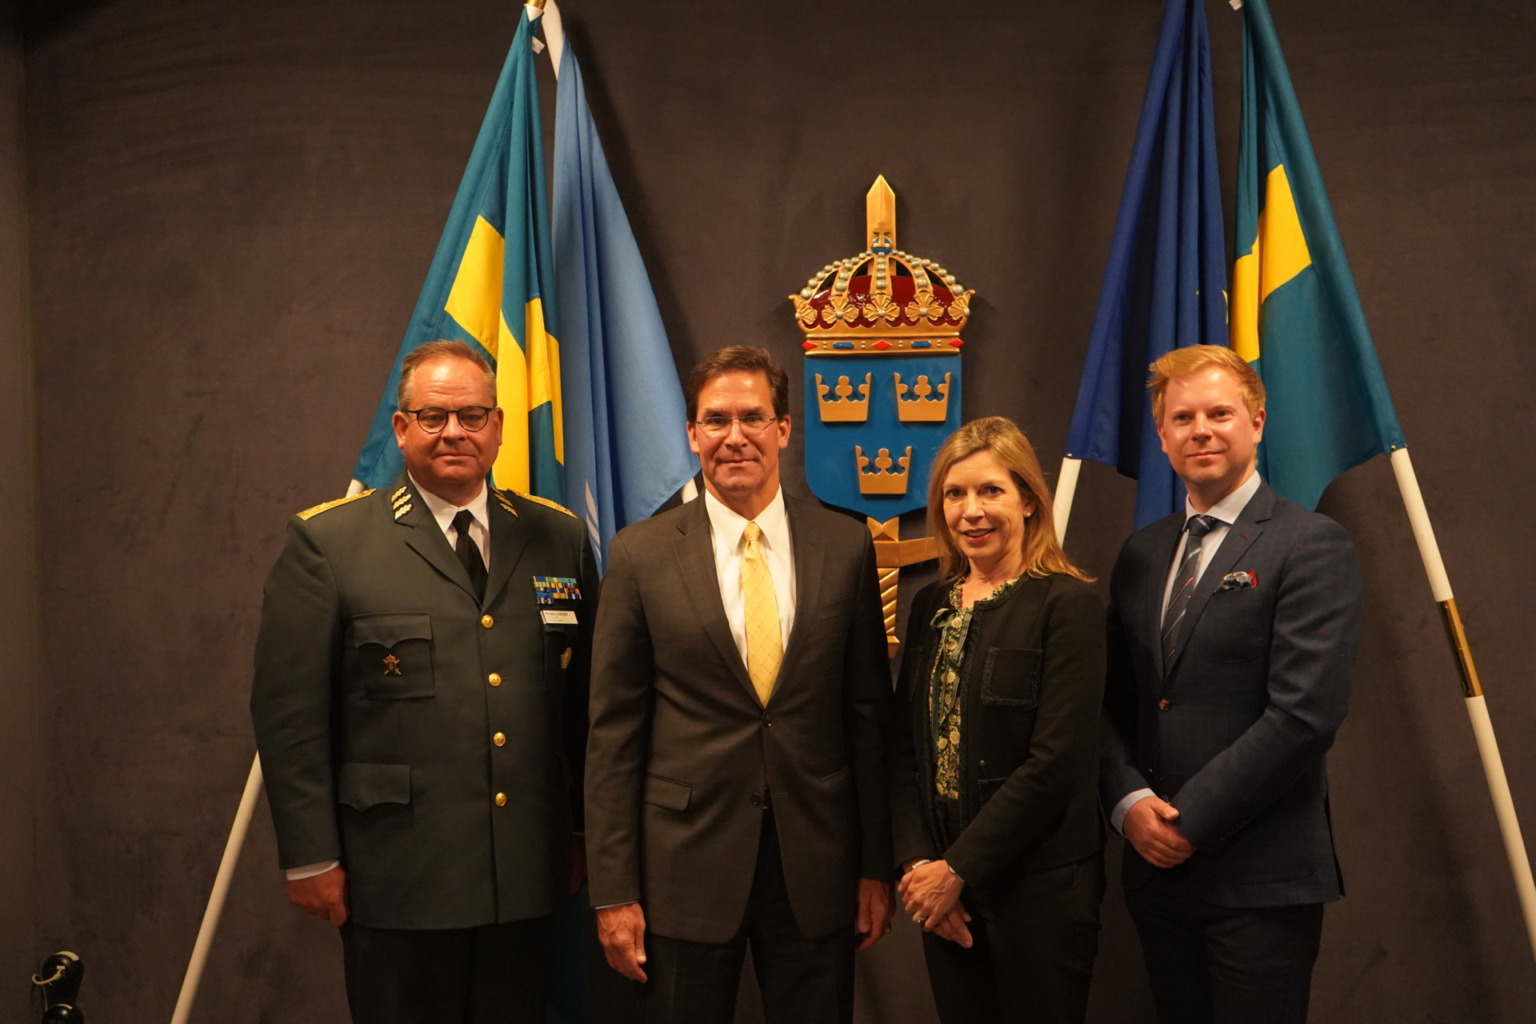 General Micael Bydén, The Chief of Defence of the Swedish Armed Forces; Esper; Evelyn; Lieutenant Commander Lauri Korhonen, Aide-de-Camp